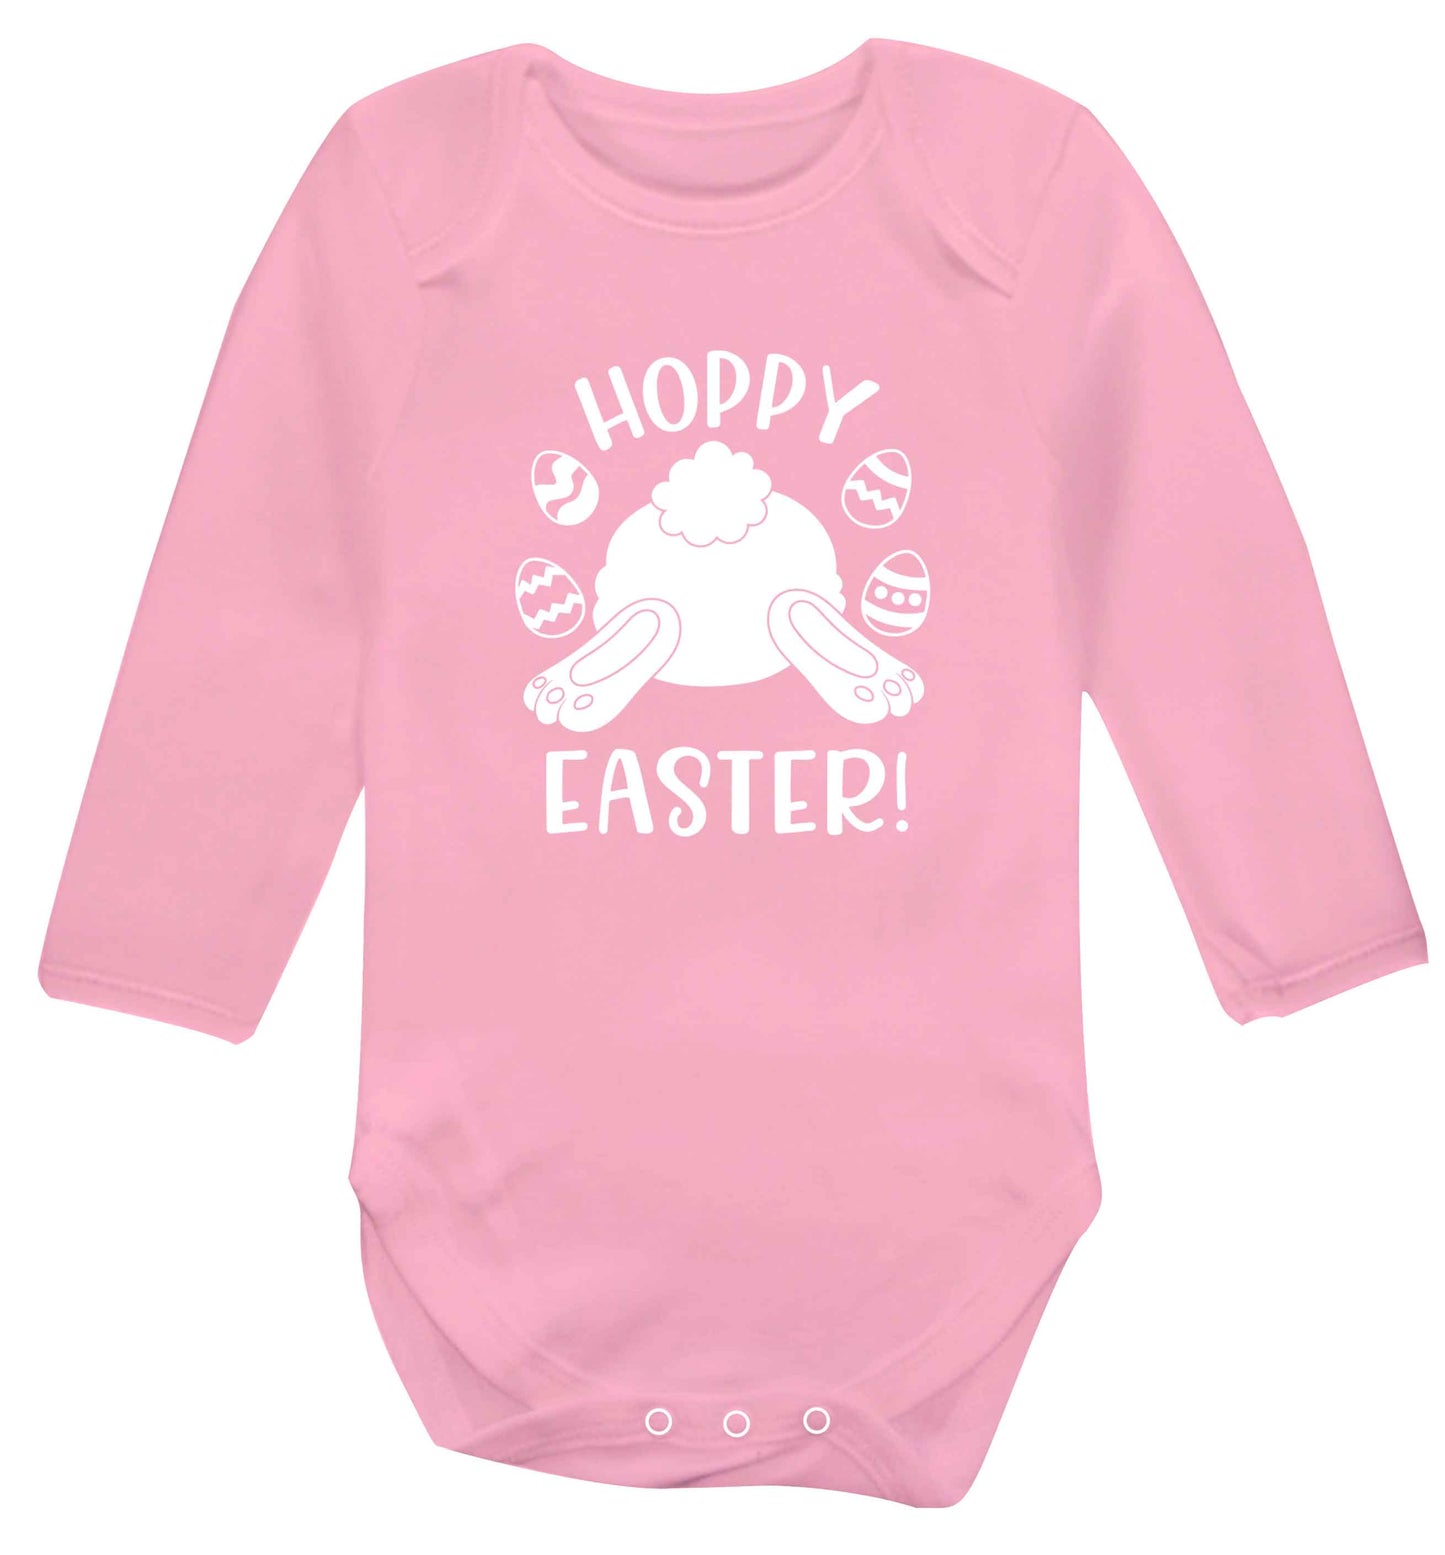 Hoppy Easter baby vest long sleeved pale pink 6-12 months